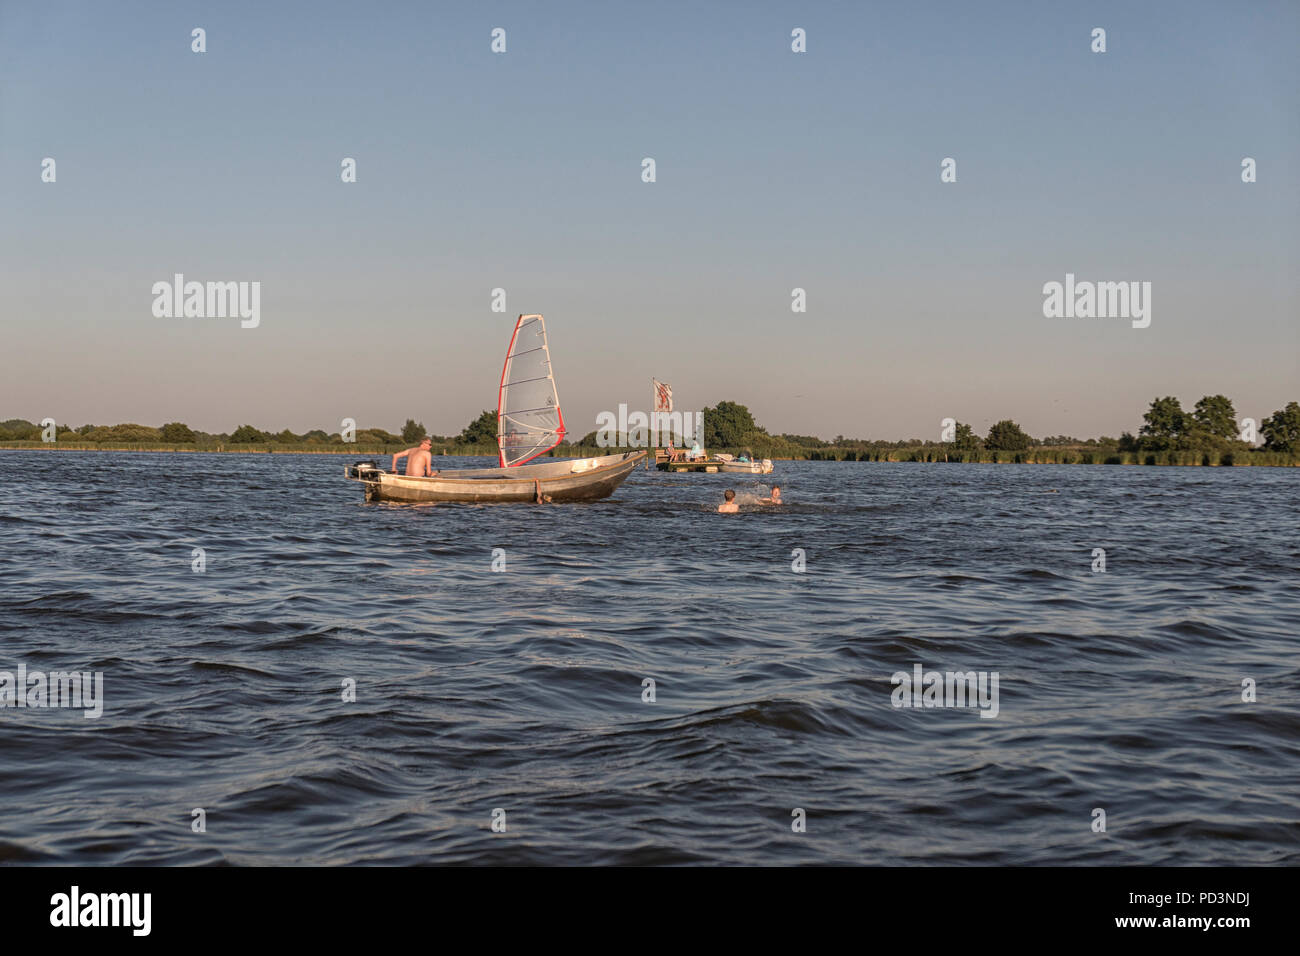 Fun in the water of the Leekstermeer in Groningen, The Netherlands during the heatwave of 2018 Stock Photo